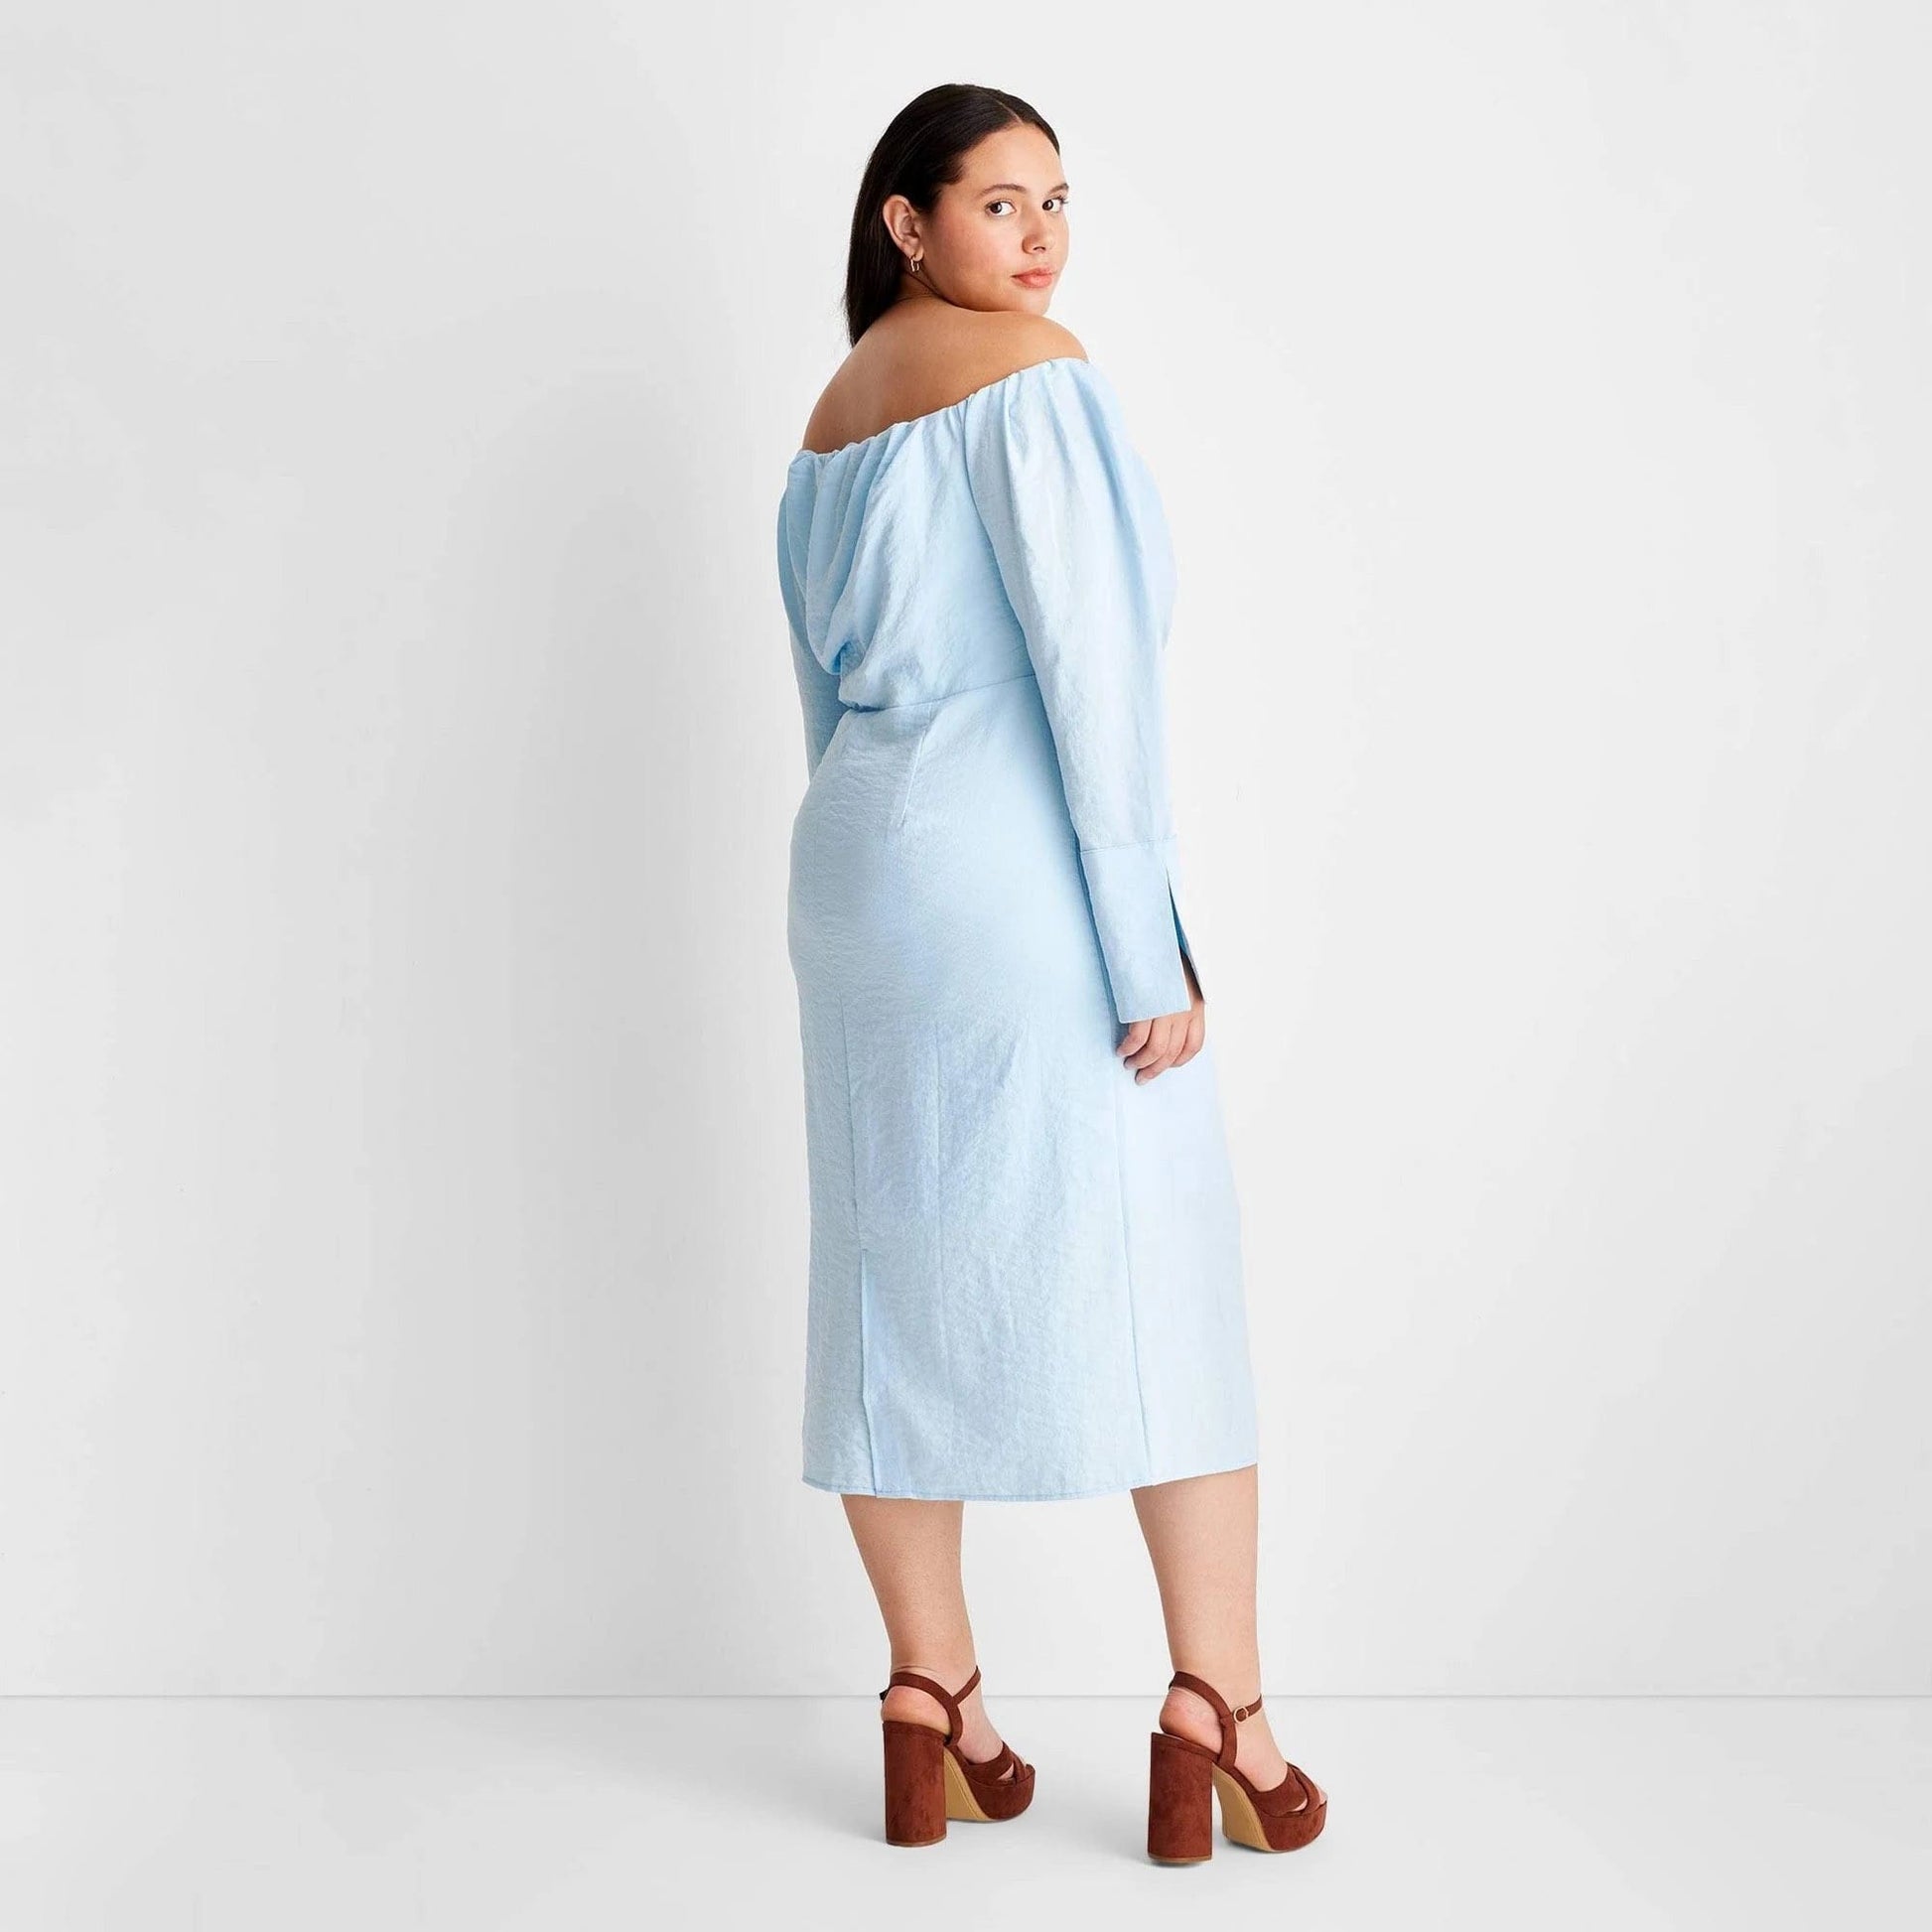 FUTURE COLLECTIVE Womens Dress L / Blue FUTURE COLLECTIVE - Off the Shoulder Long Sleeve MIDI Dress